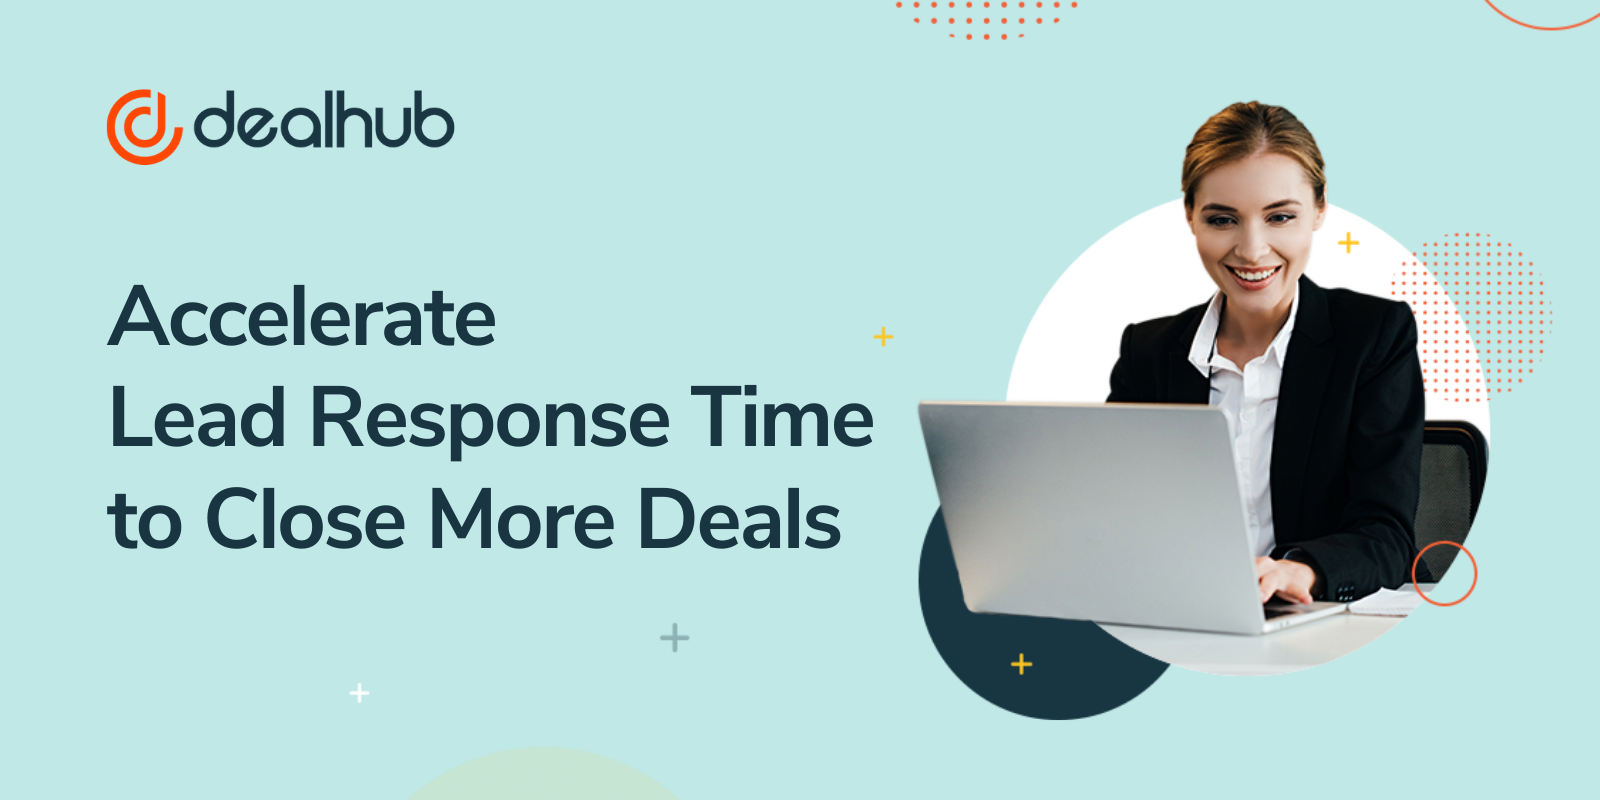 Accelerate Lead Response Time to Close More Deals